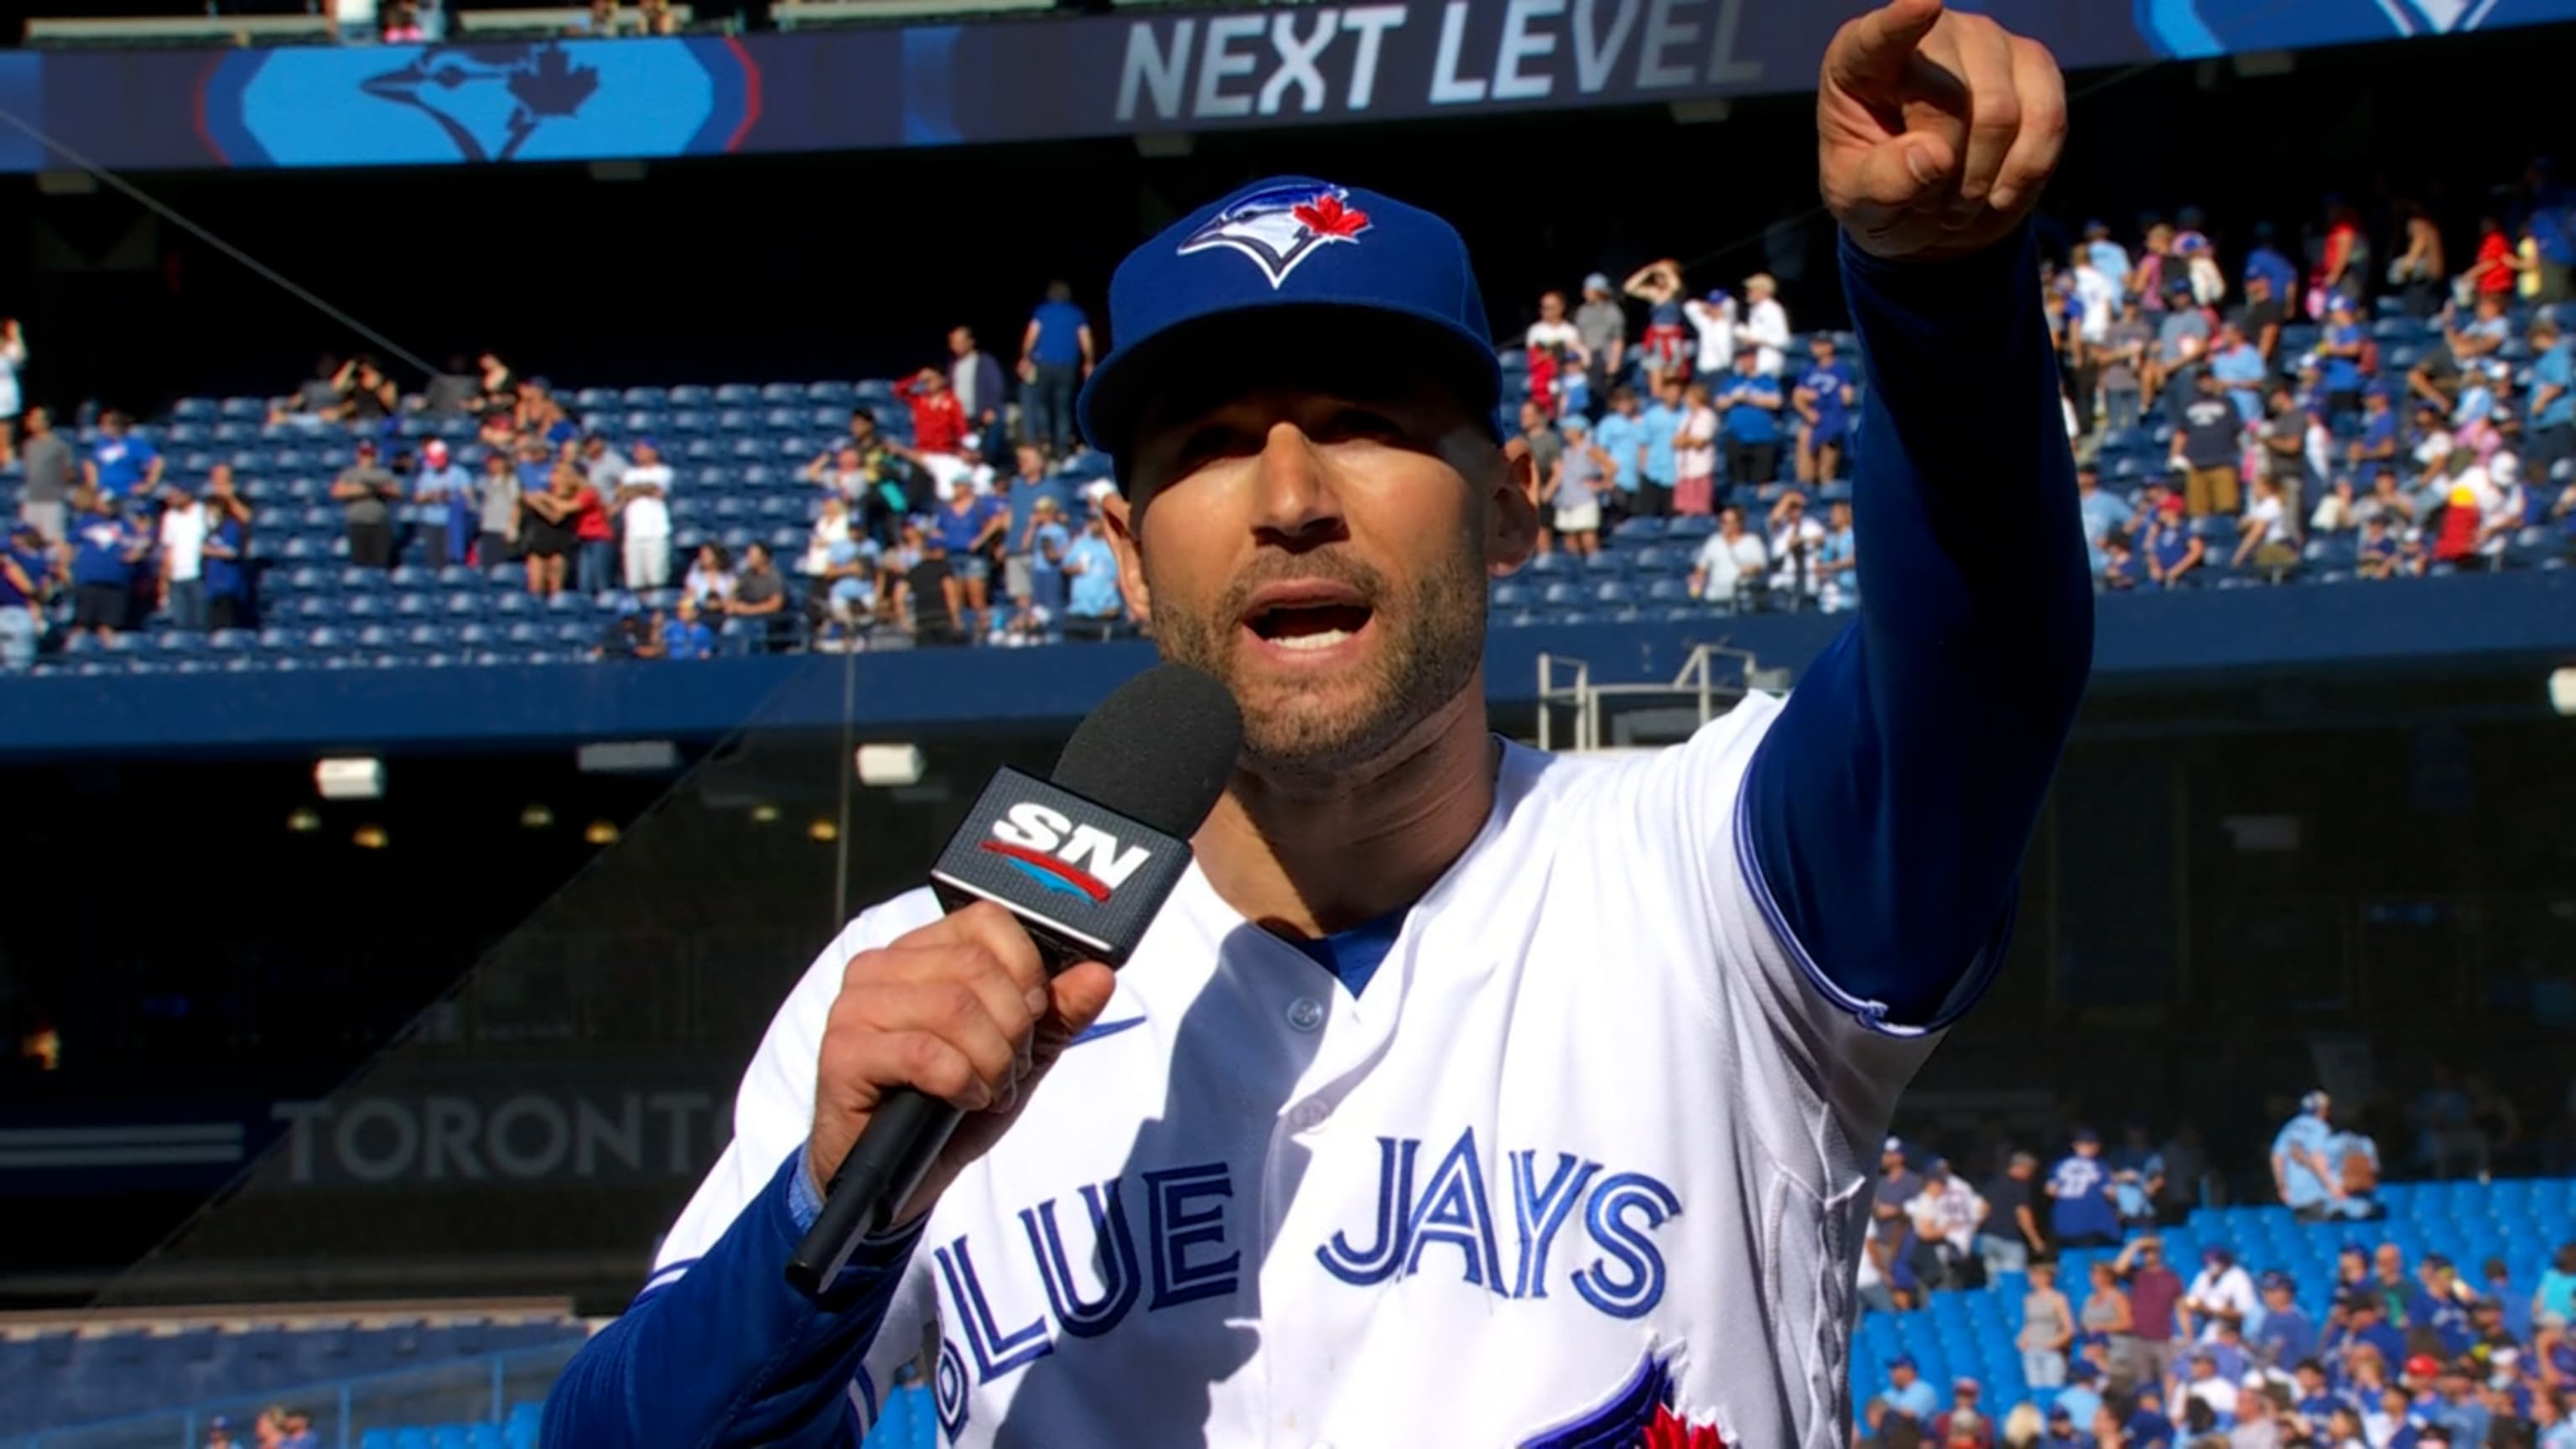 Kirk's 8th inning 2-run homer lifts Blue Jays past Royals to claim